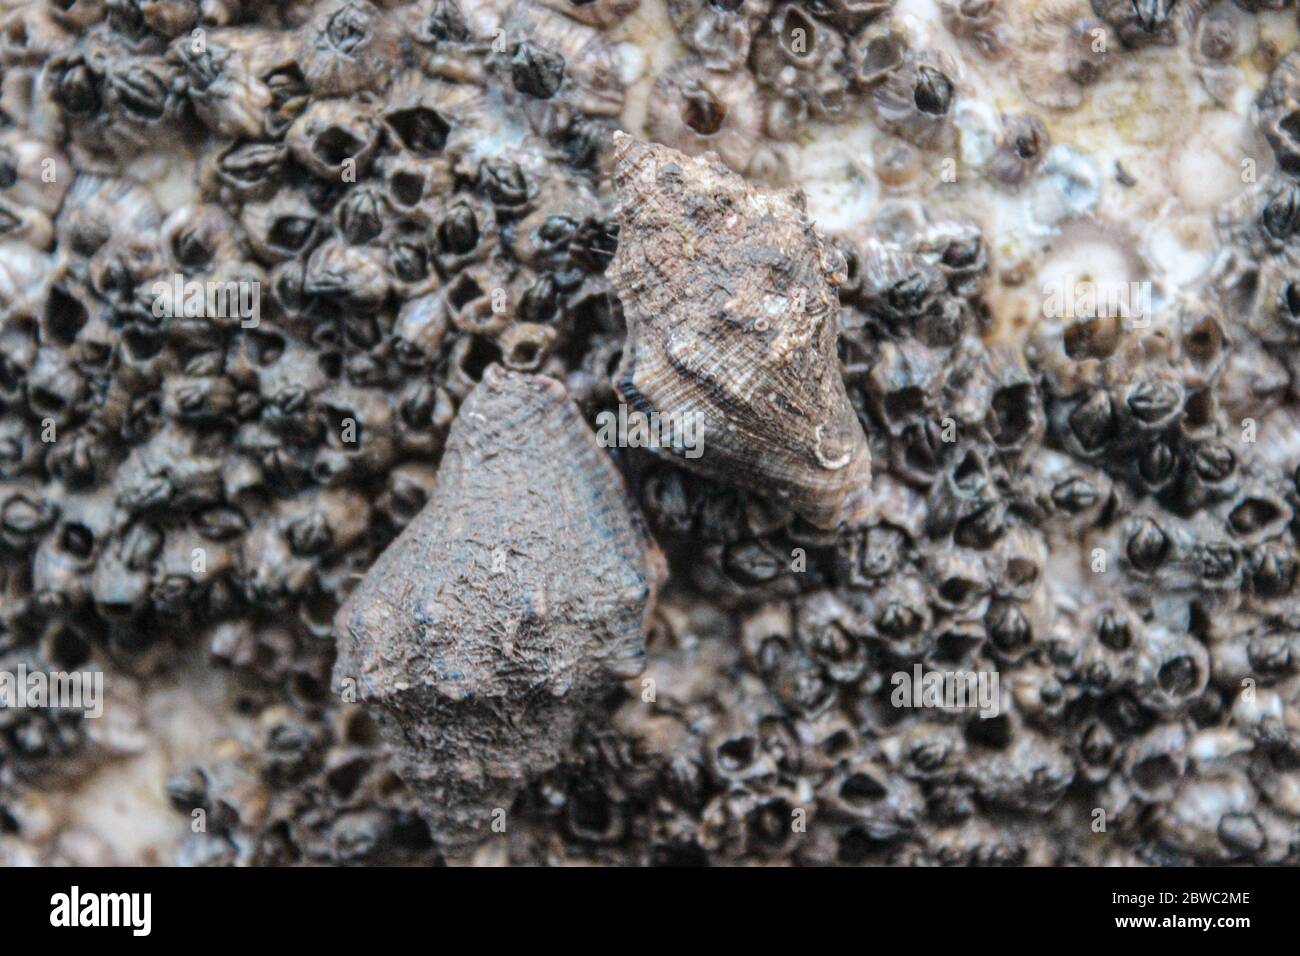 two old snail shells are stuck on a rock full of crustaceans Stock Photo